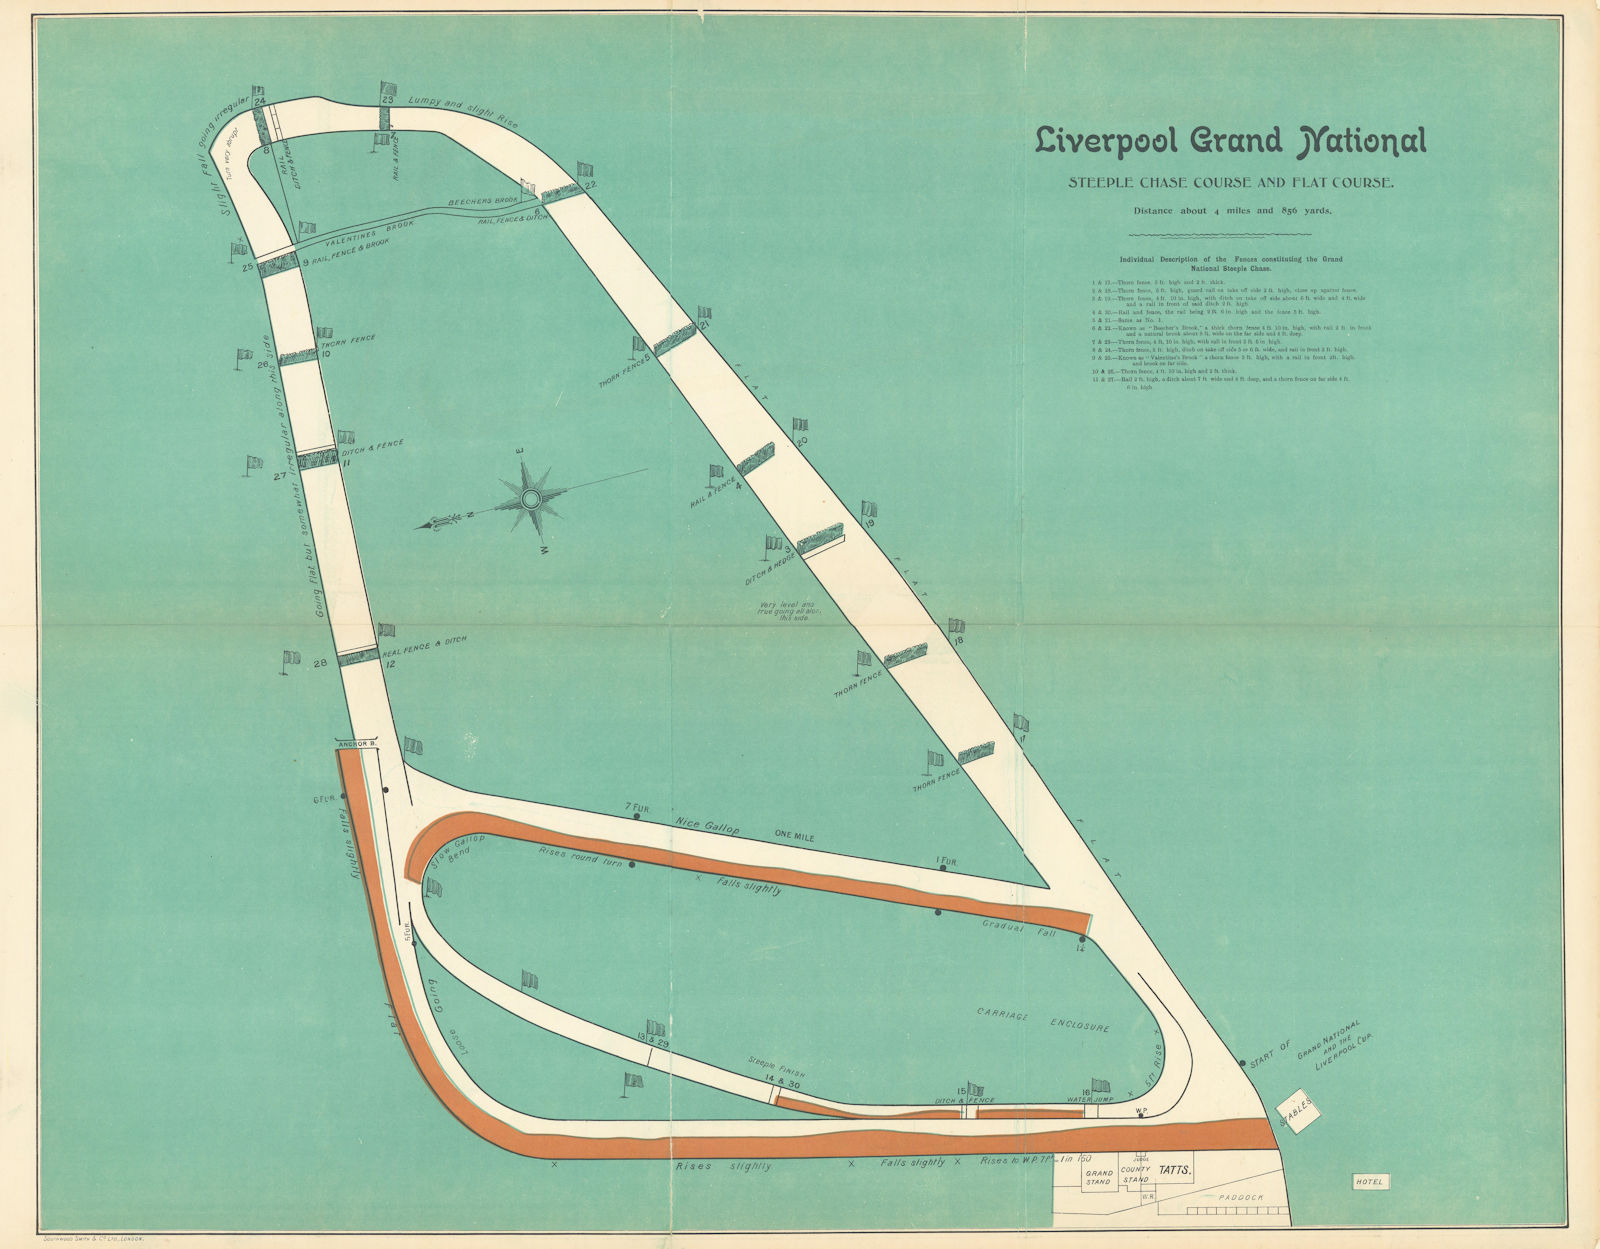 Aintree steeplechase & flat racecourse Liverpool Grand National. BAYLES 1903 map